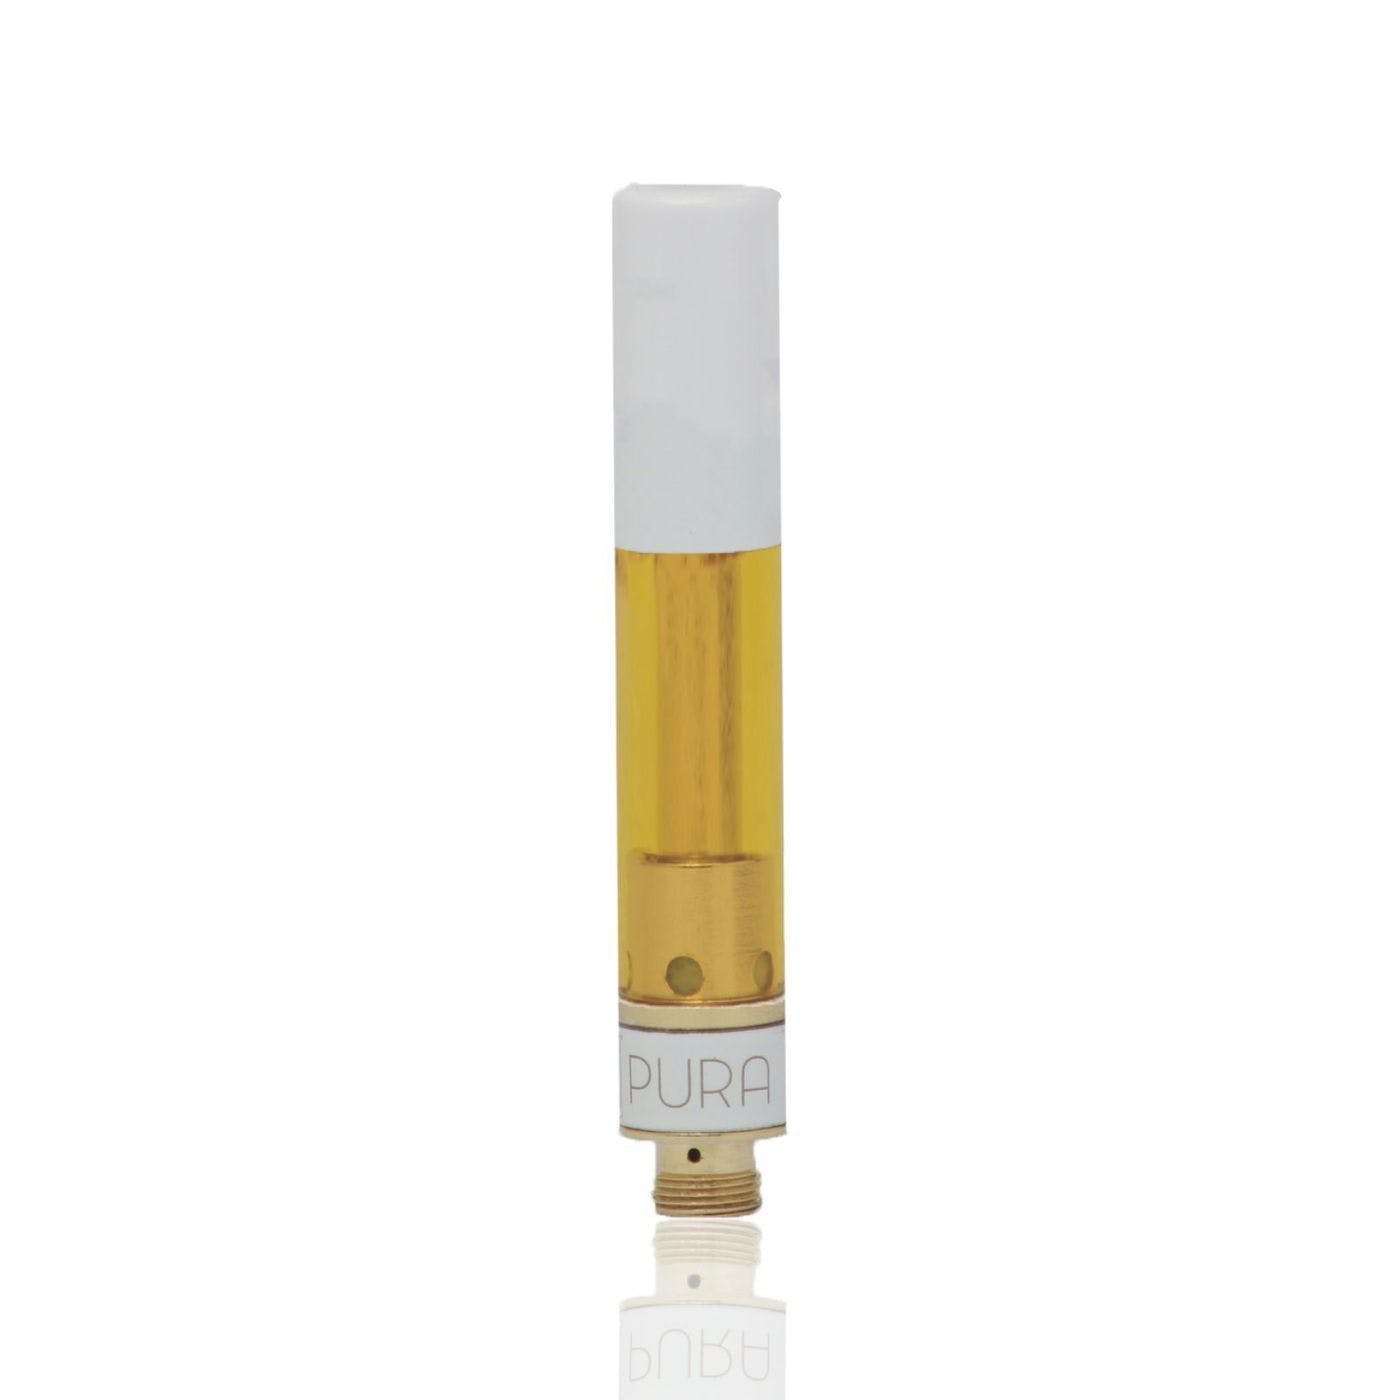 concentrate-pura-1000mg-cartridge